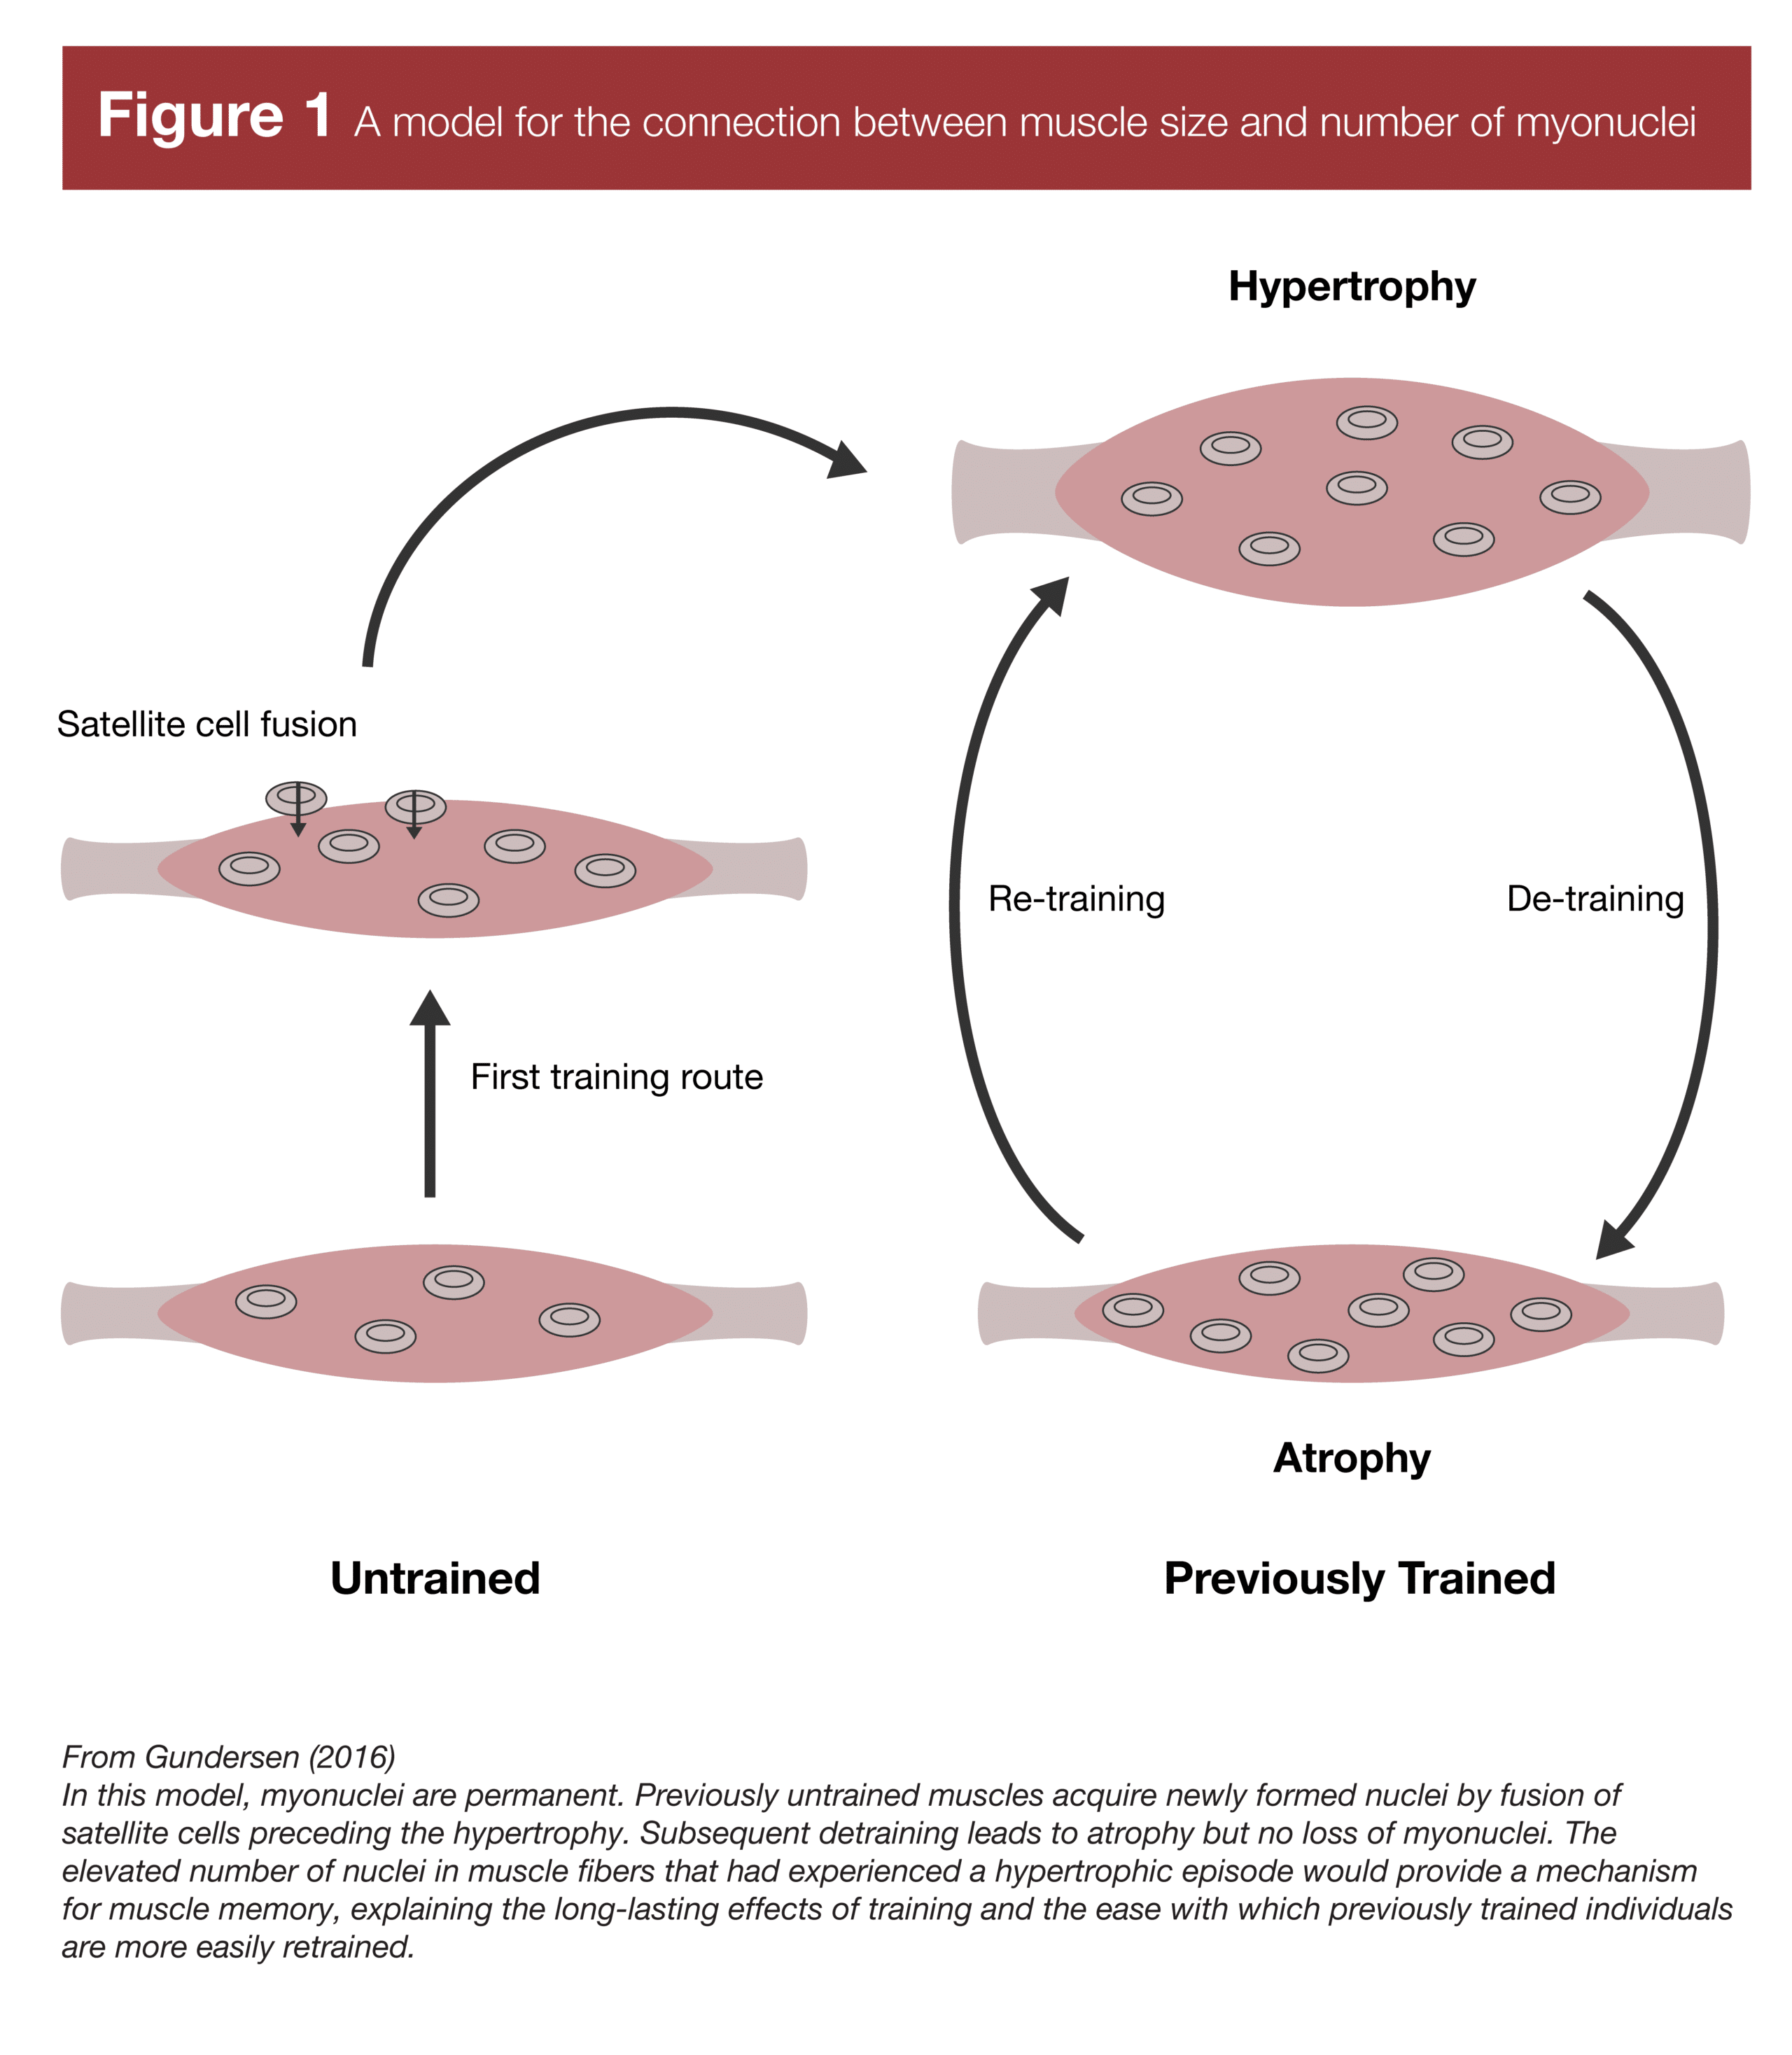 A model for the connection between muscle size and number of myonuclei